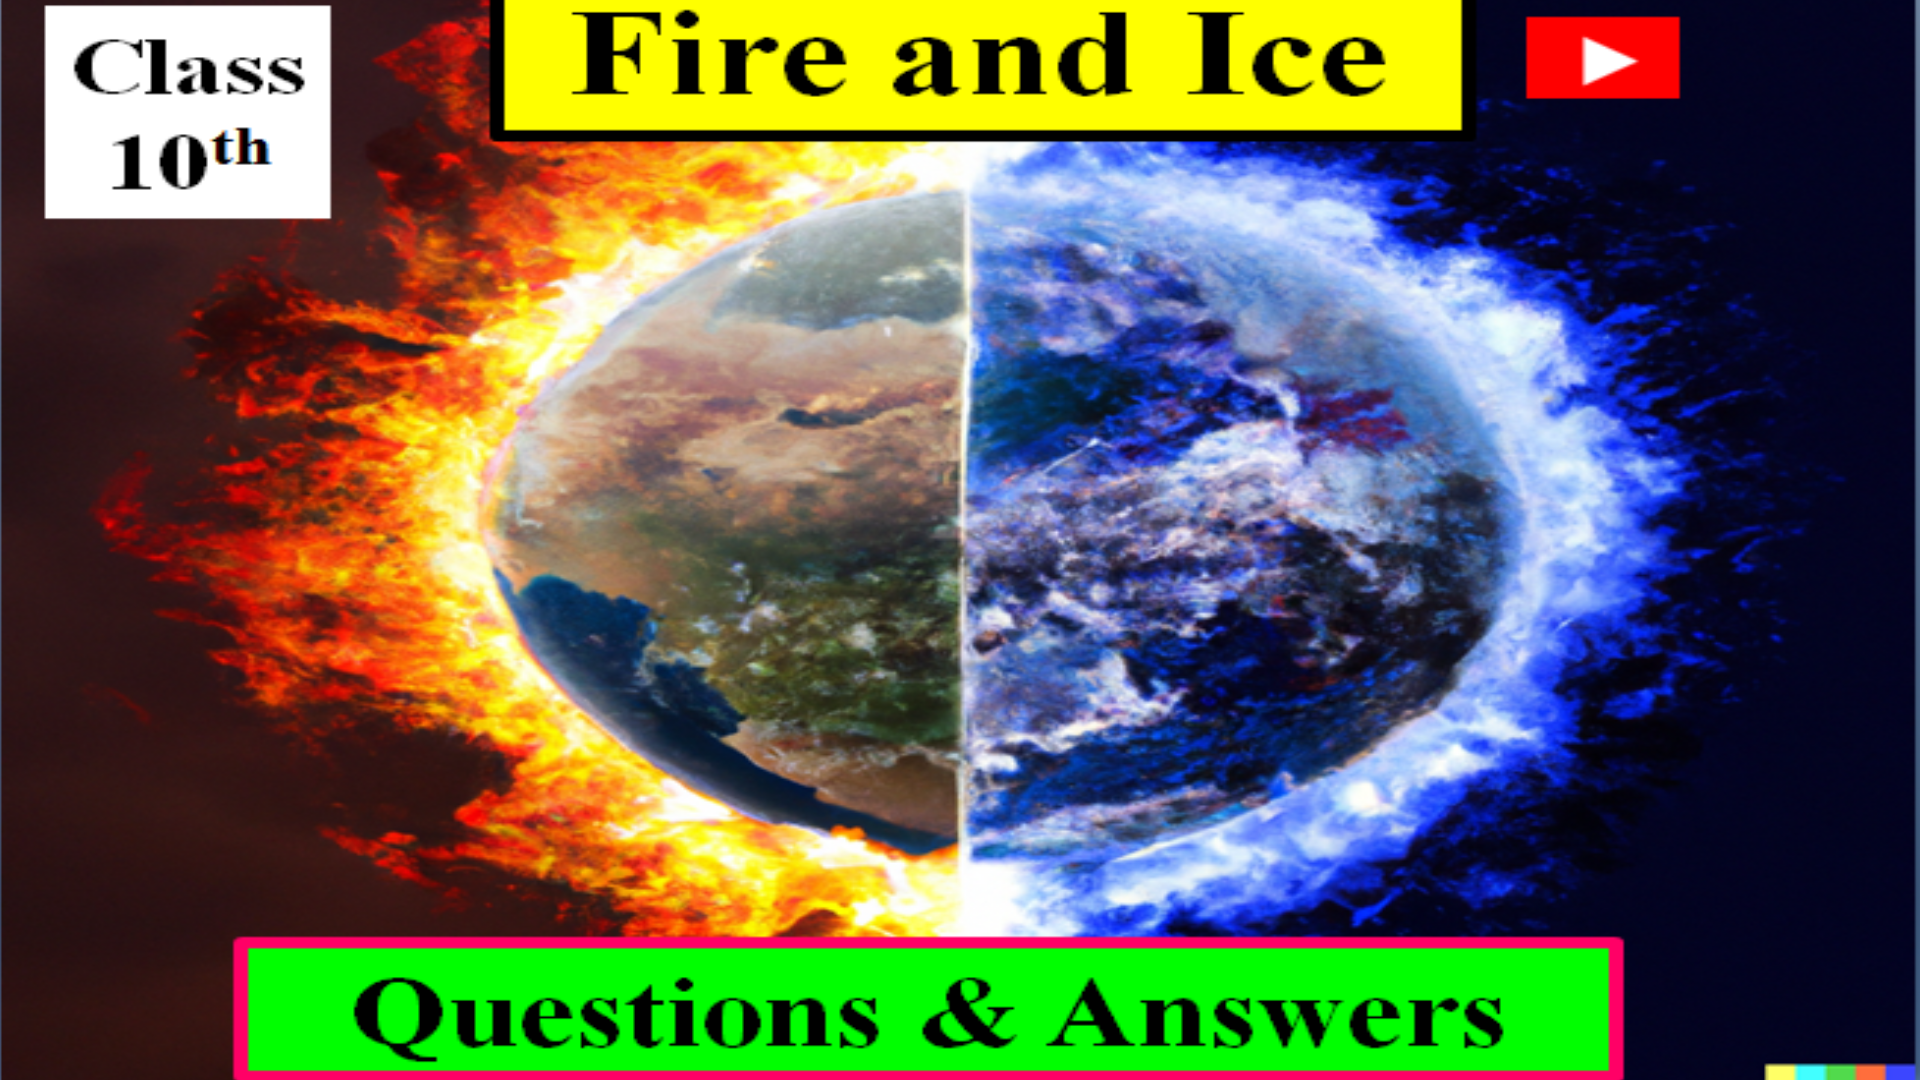 Fire and ice By Robert Frost